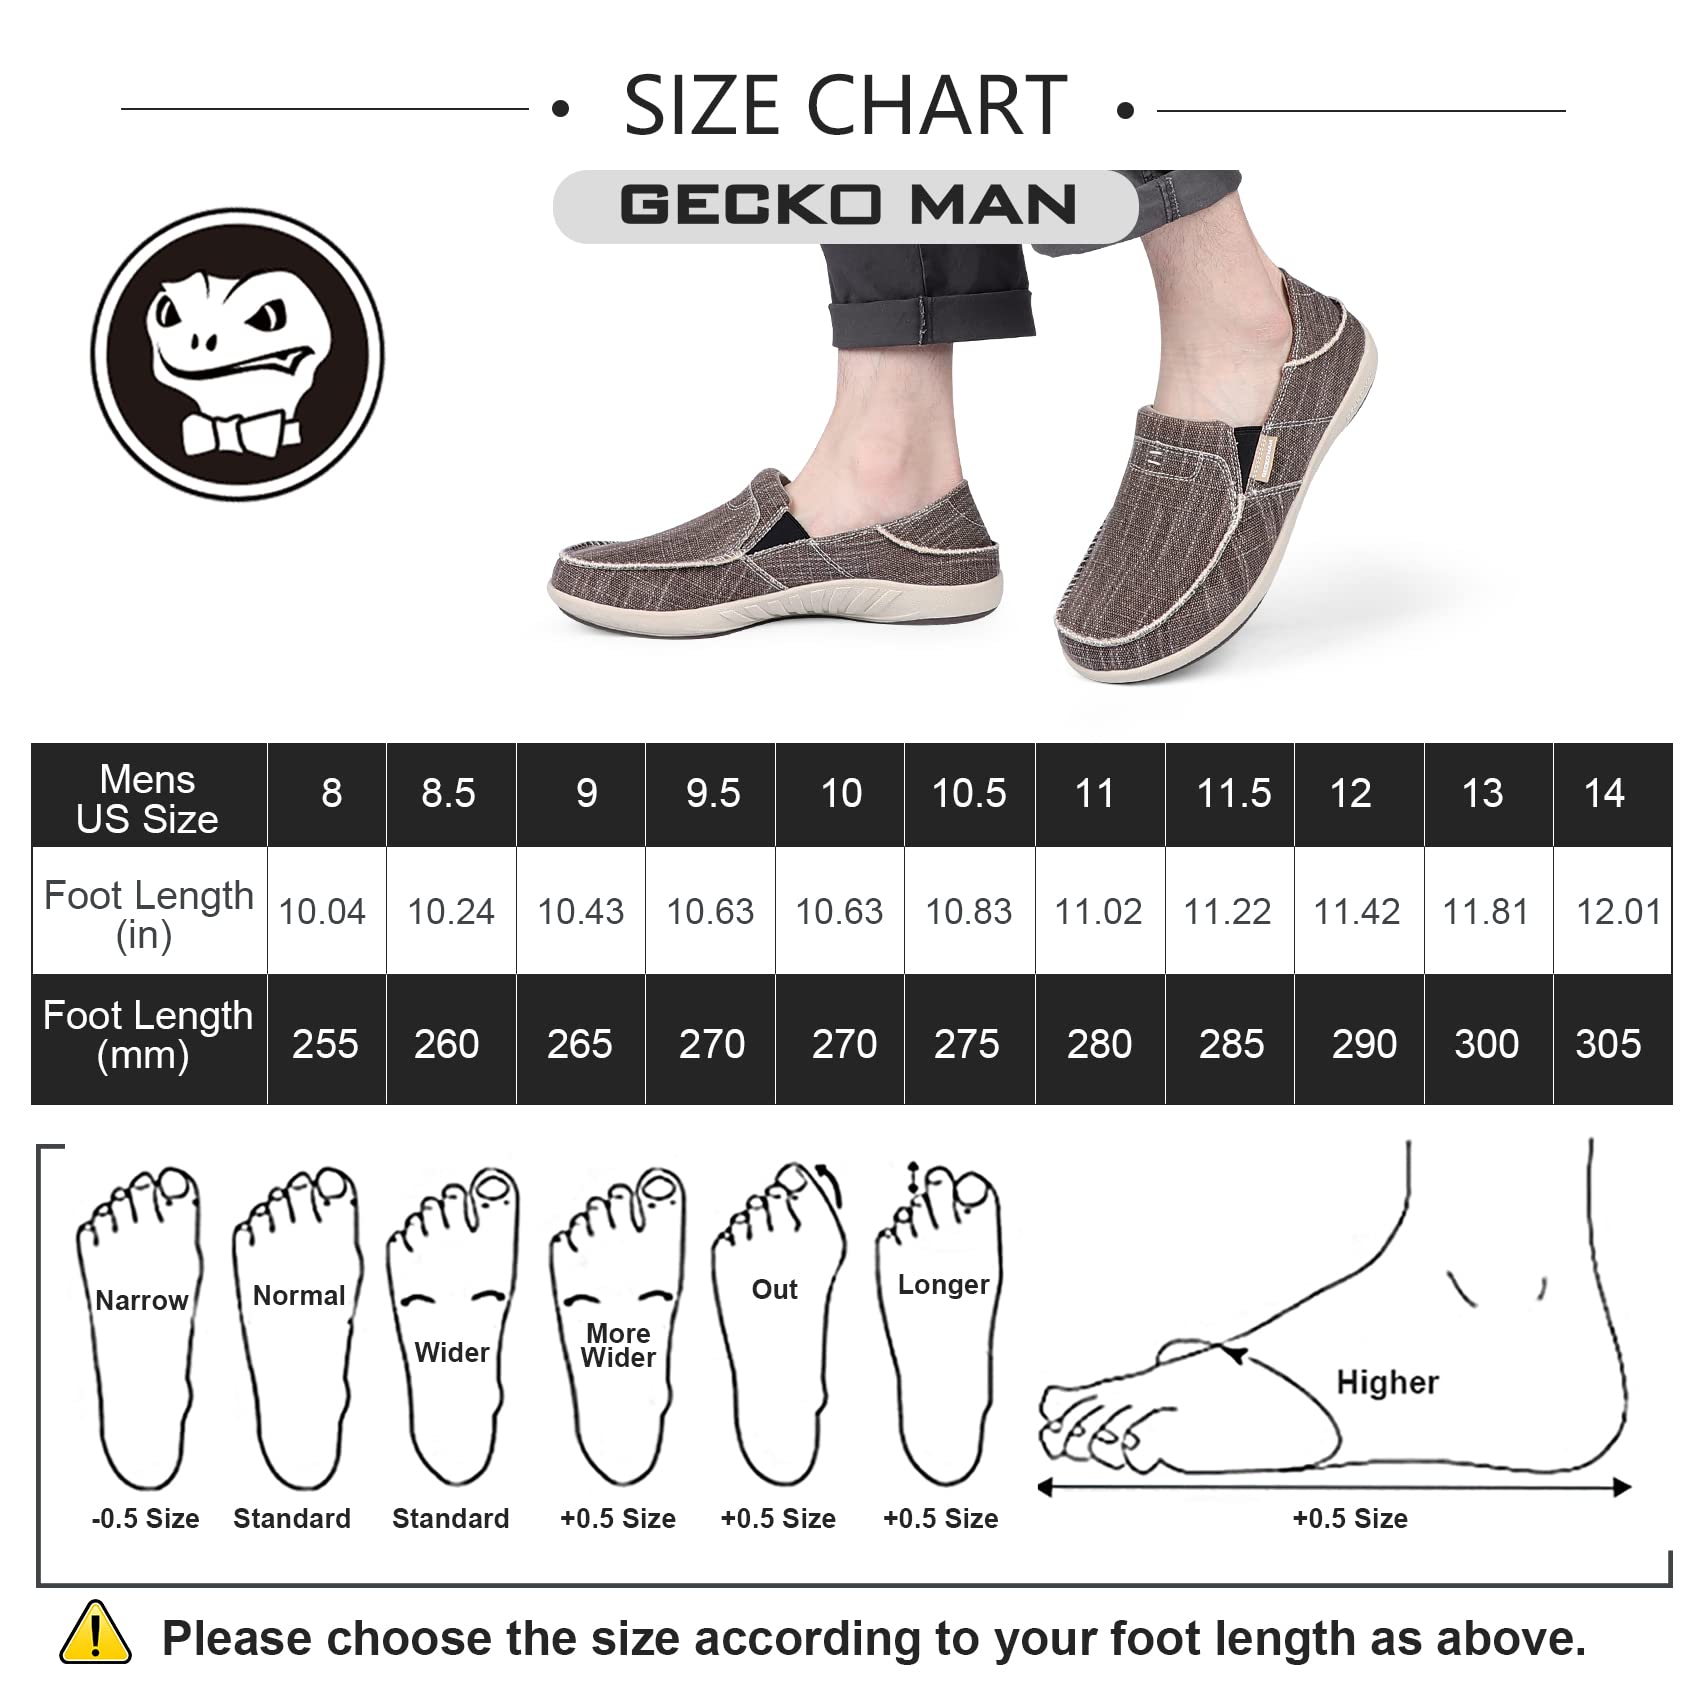 Slip On Shoes for Men, Plantar Fasciitis Canvas Loafer Shoes with Arch Support, Orthopedic Casual Non Slip Mule Shoes with Rubber Sole